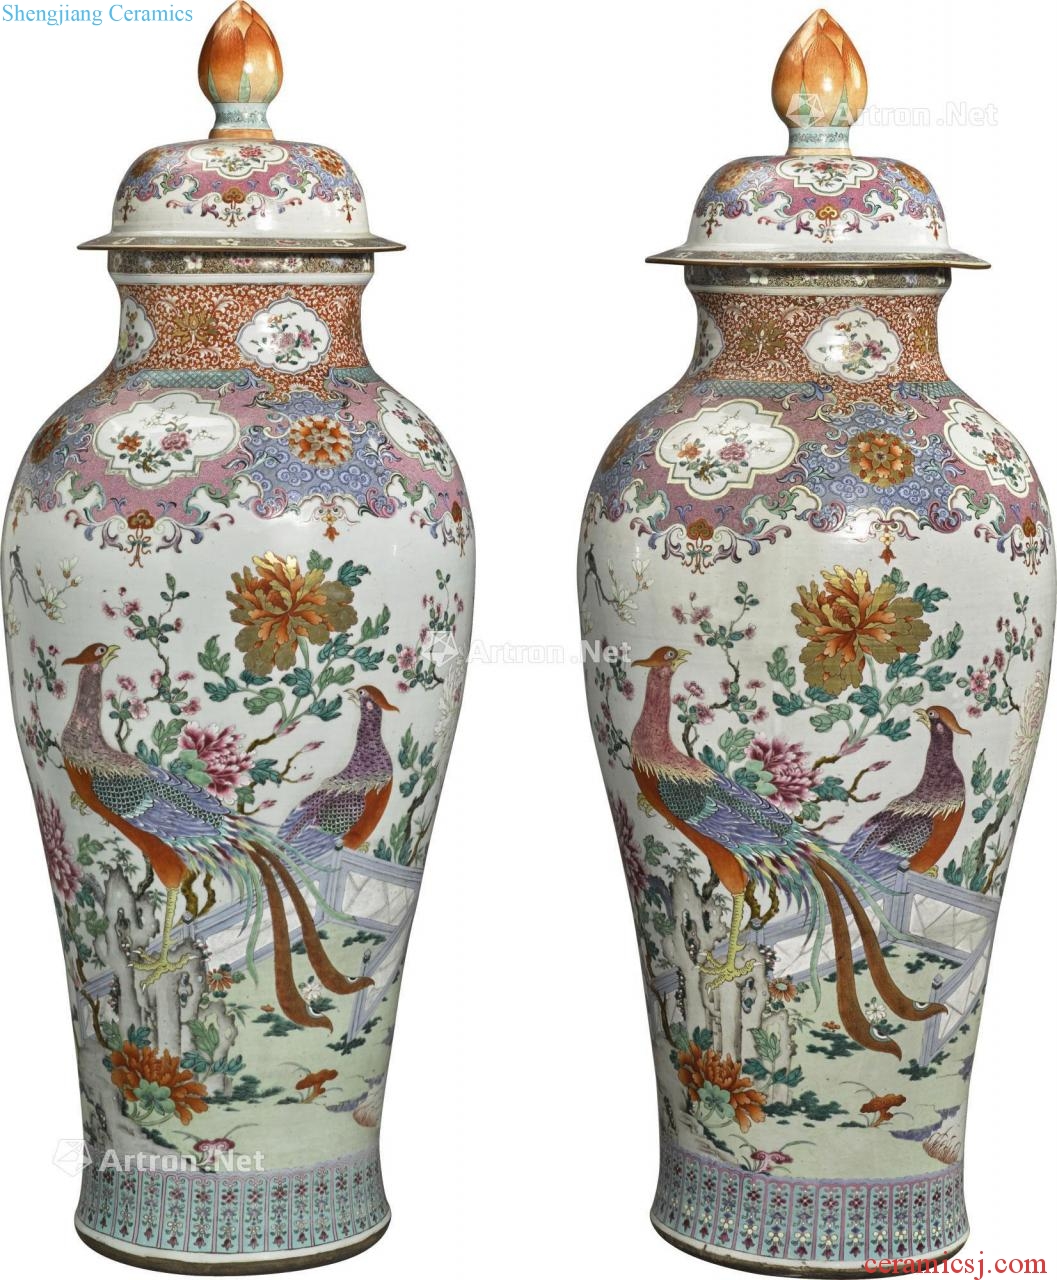 About 1740 years qing qianlong pastel kam hall riches and honour figure large bottle cover (a)